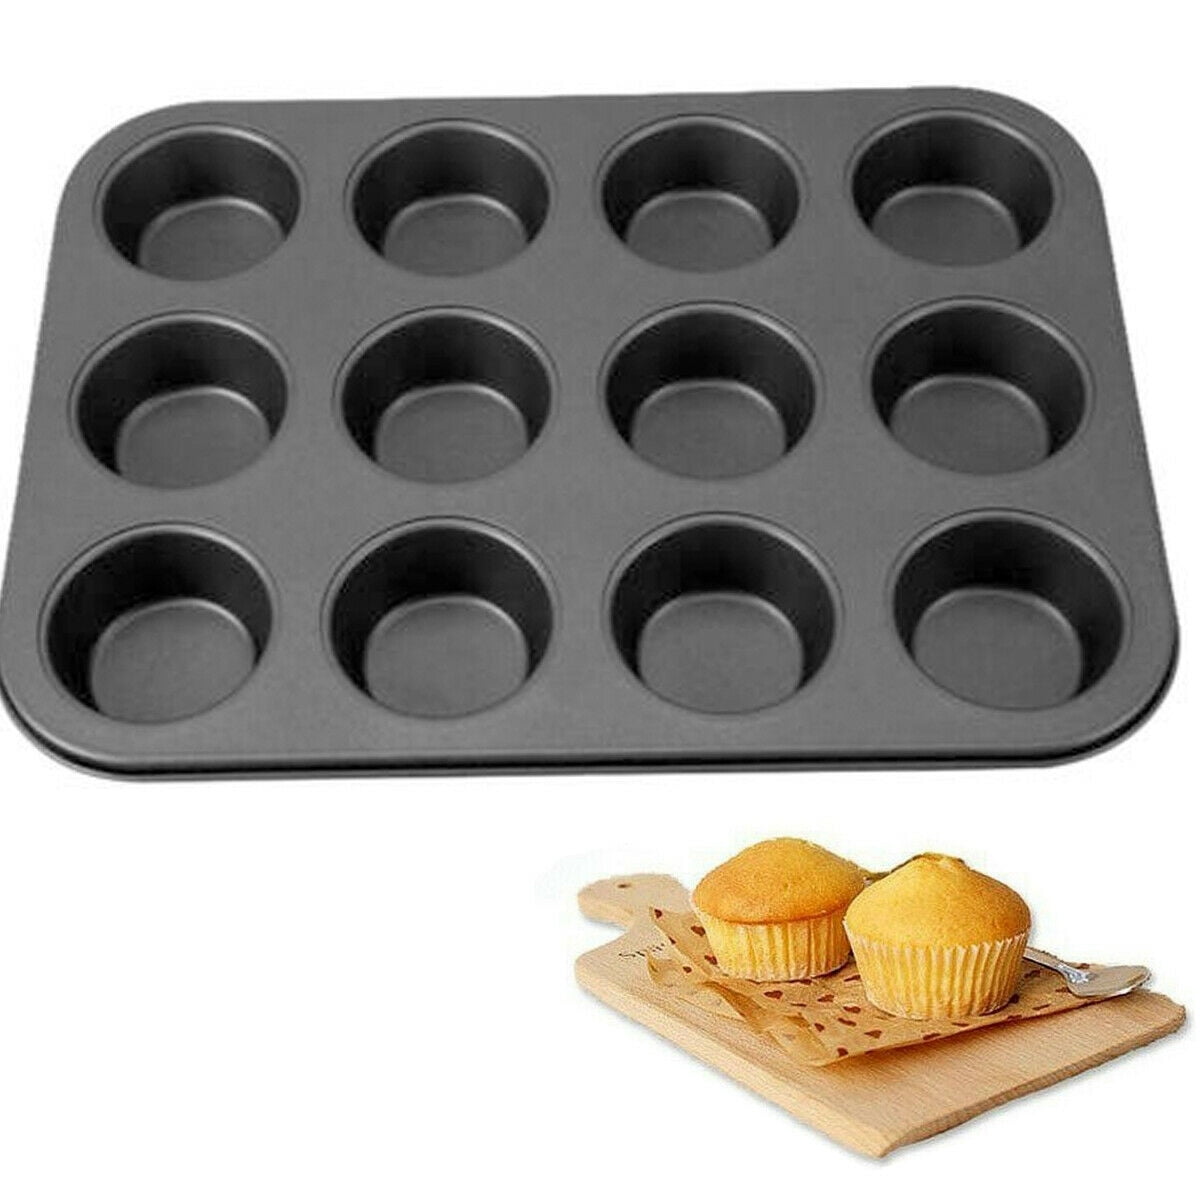 Reston Lloyd Bake Porter 12-Cup Muffin Pan with Serving Cover Red FREE2DAYSHIP 